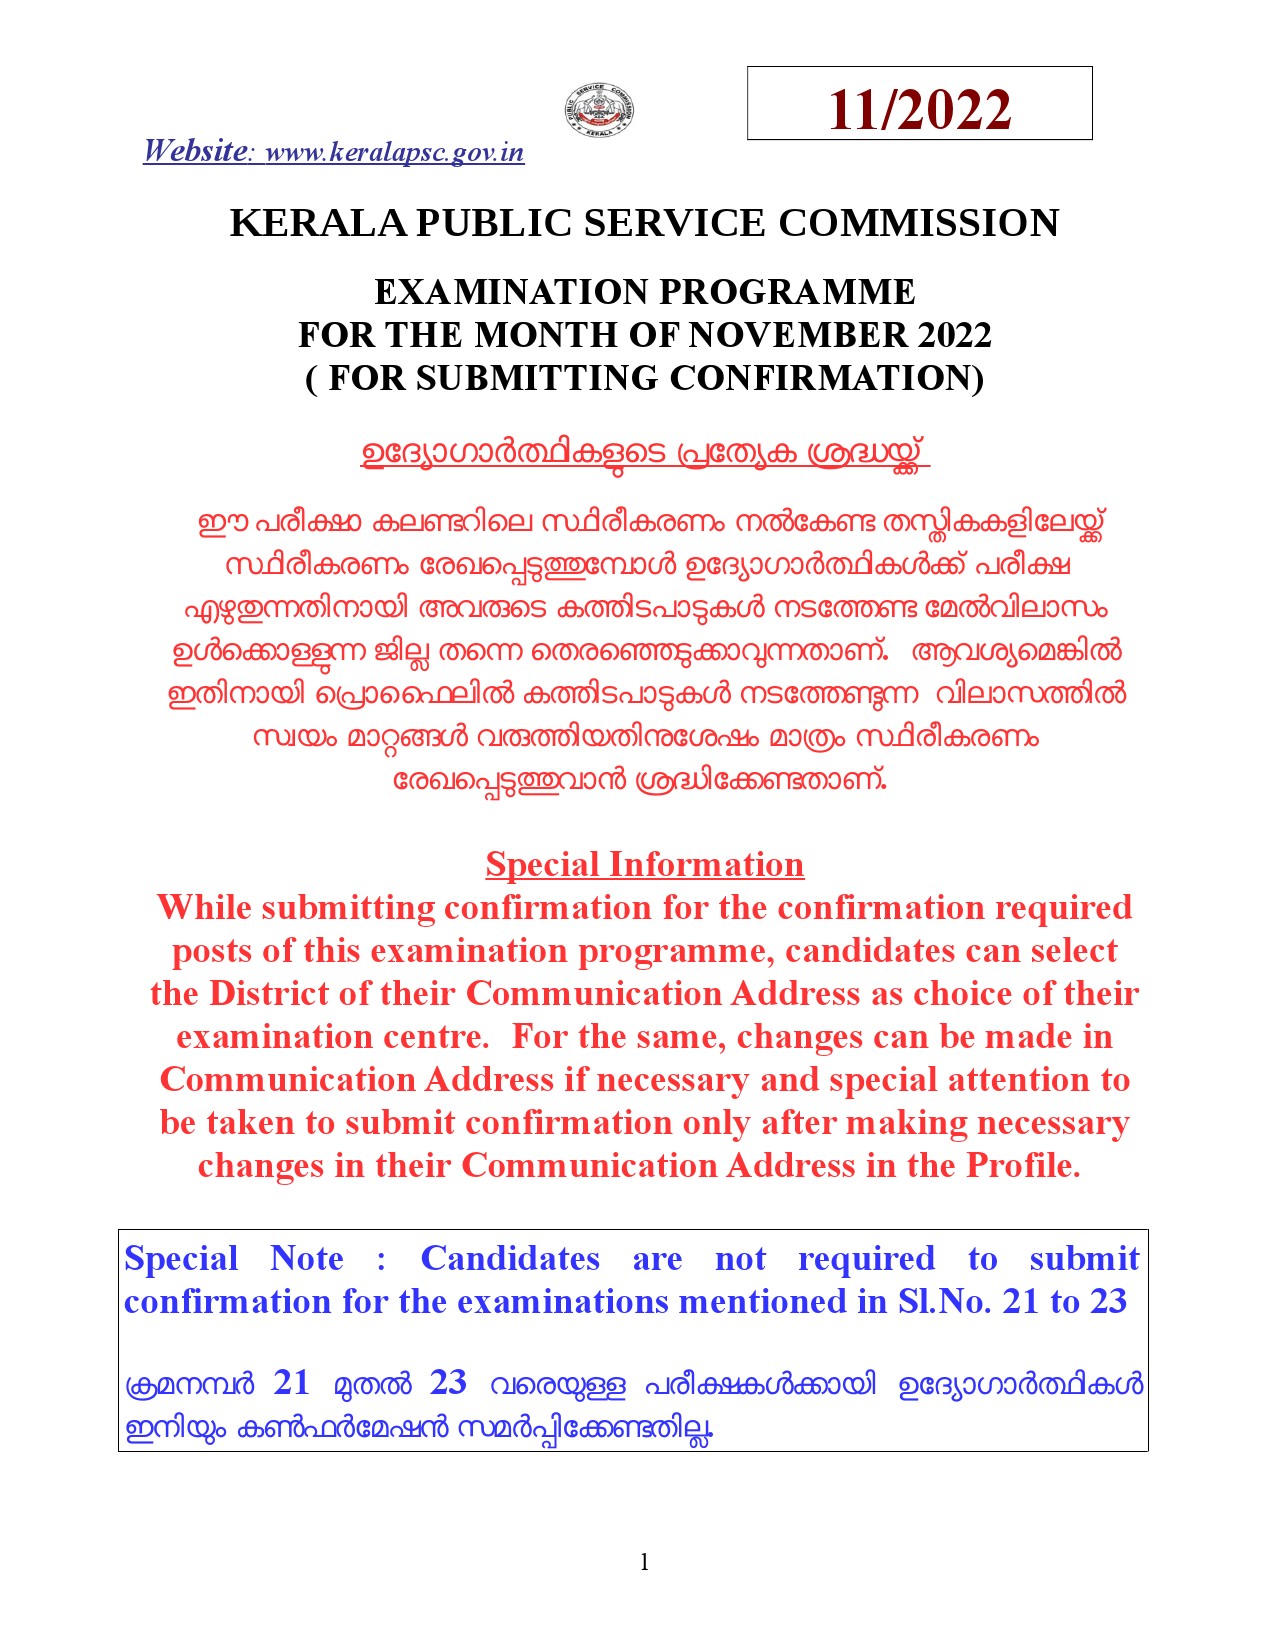 KPSC EXAMINATION PROGRAMME FOR THE MONTH OF NOVEMBER 2022 - Notification Image 1